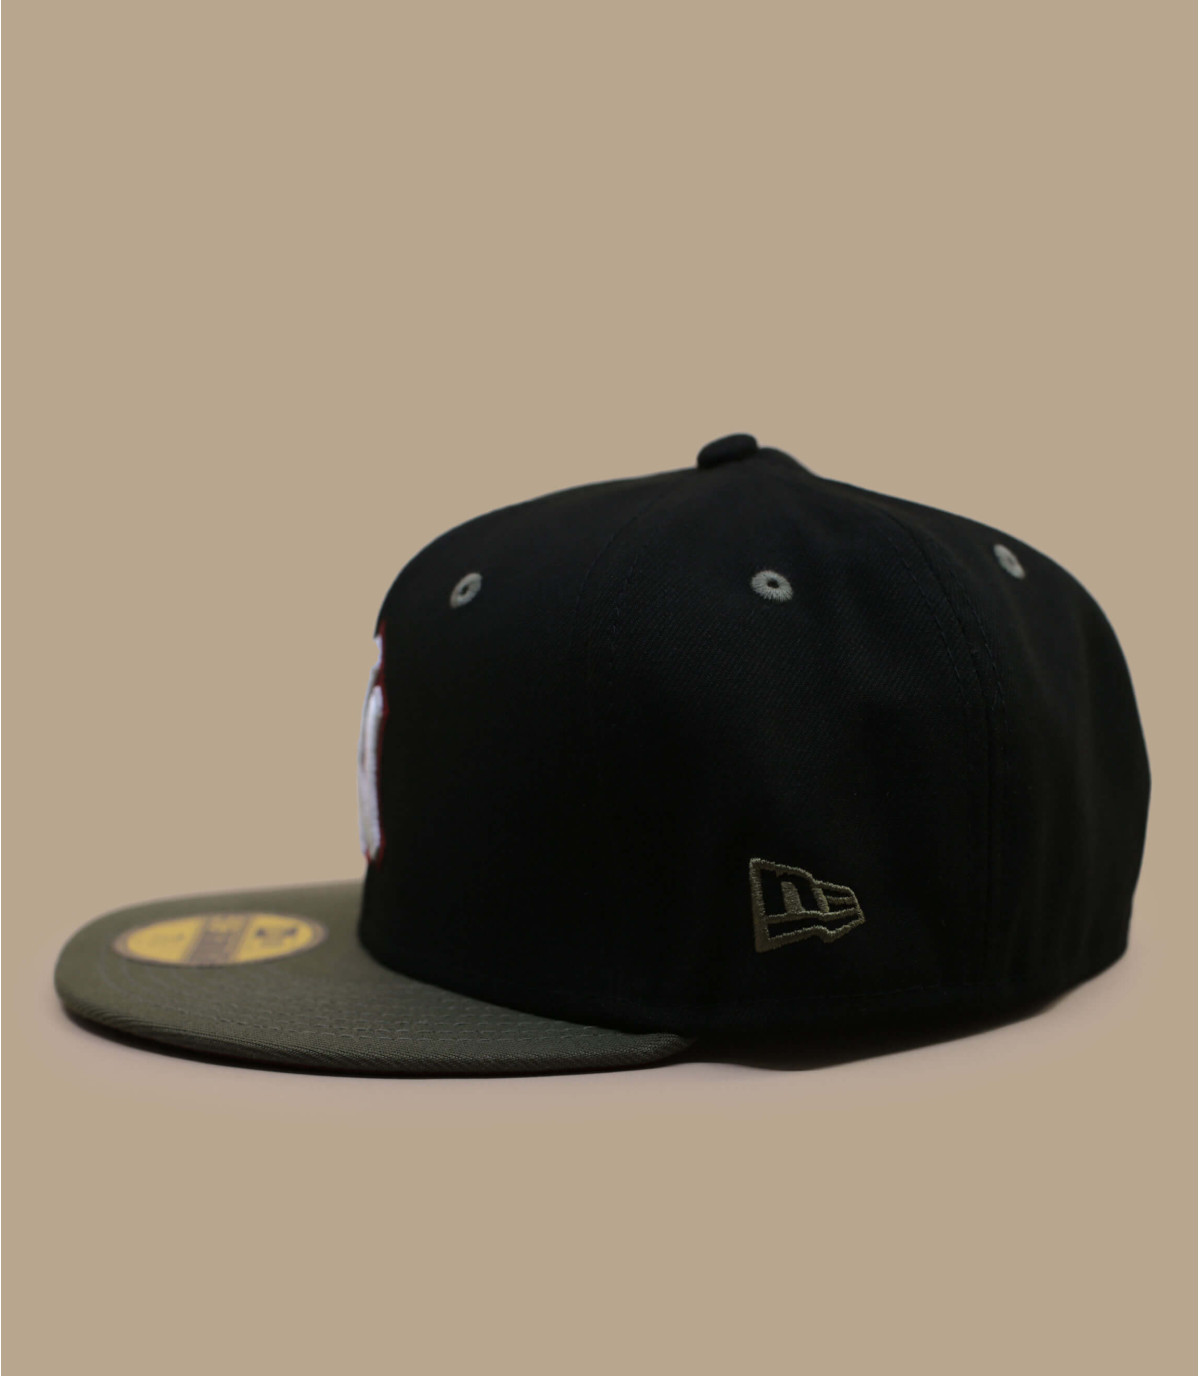 THE CAP 別注 LP5950 SIDE PATCH NEYYANCO - キャップ